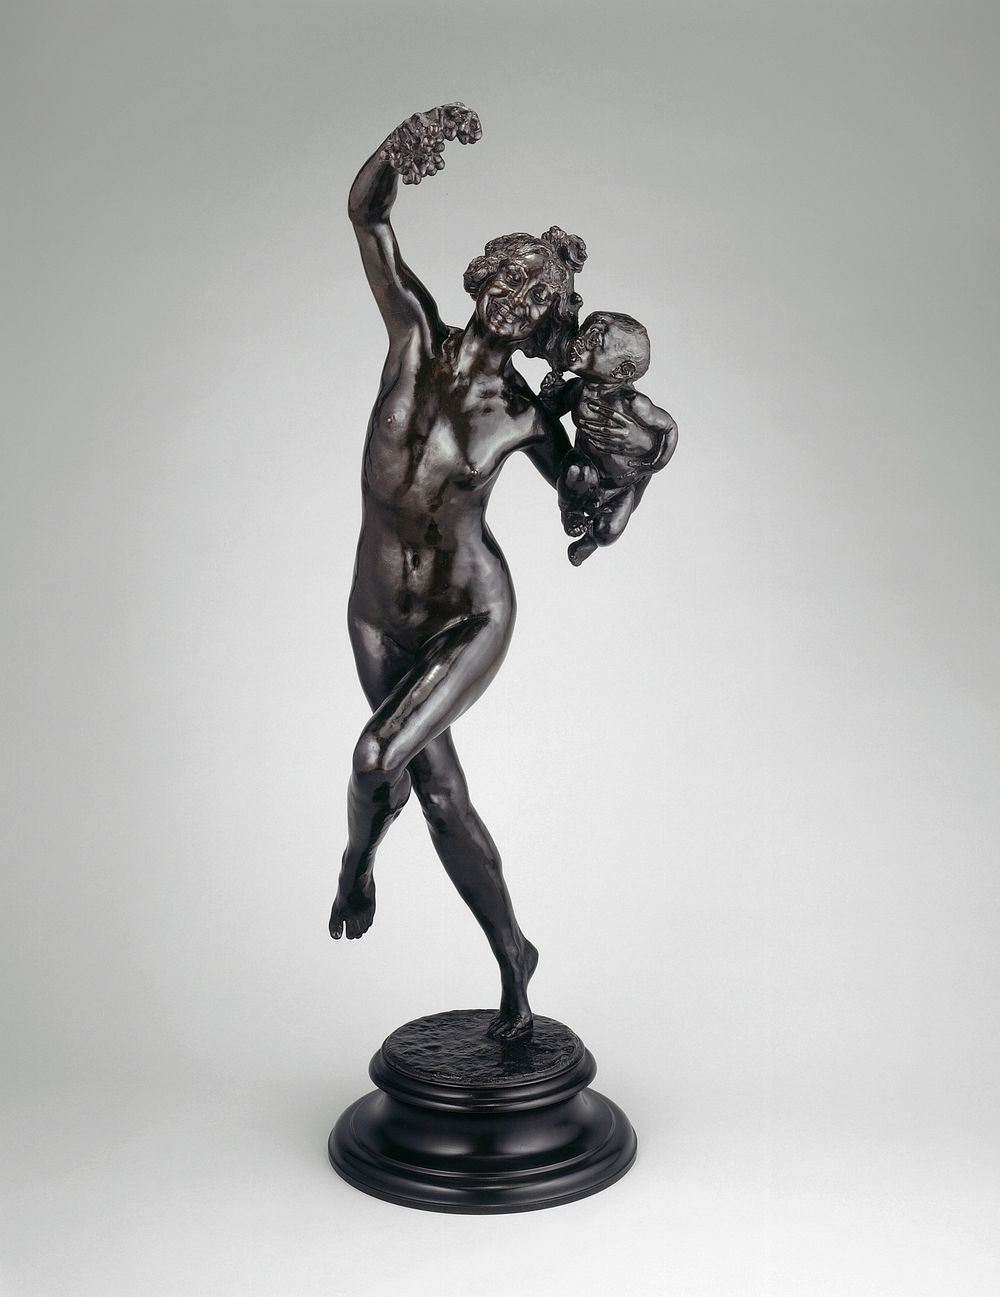 Bacchante with Infant Faun by Frederick William MacMonnies (Sculptor)